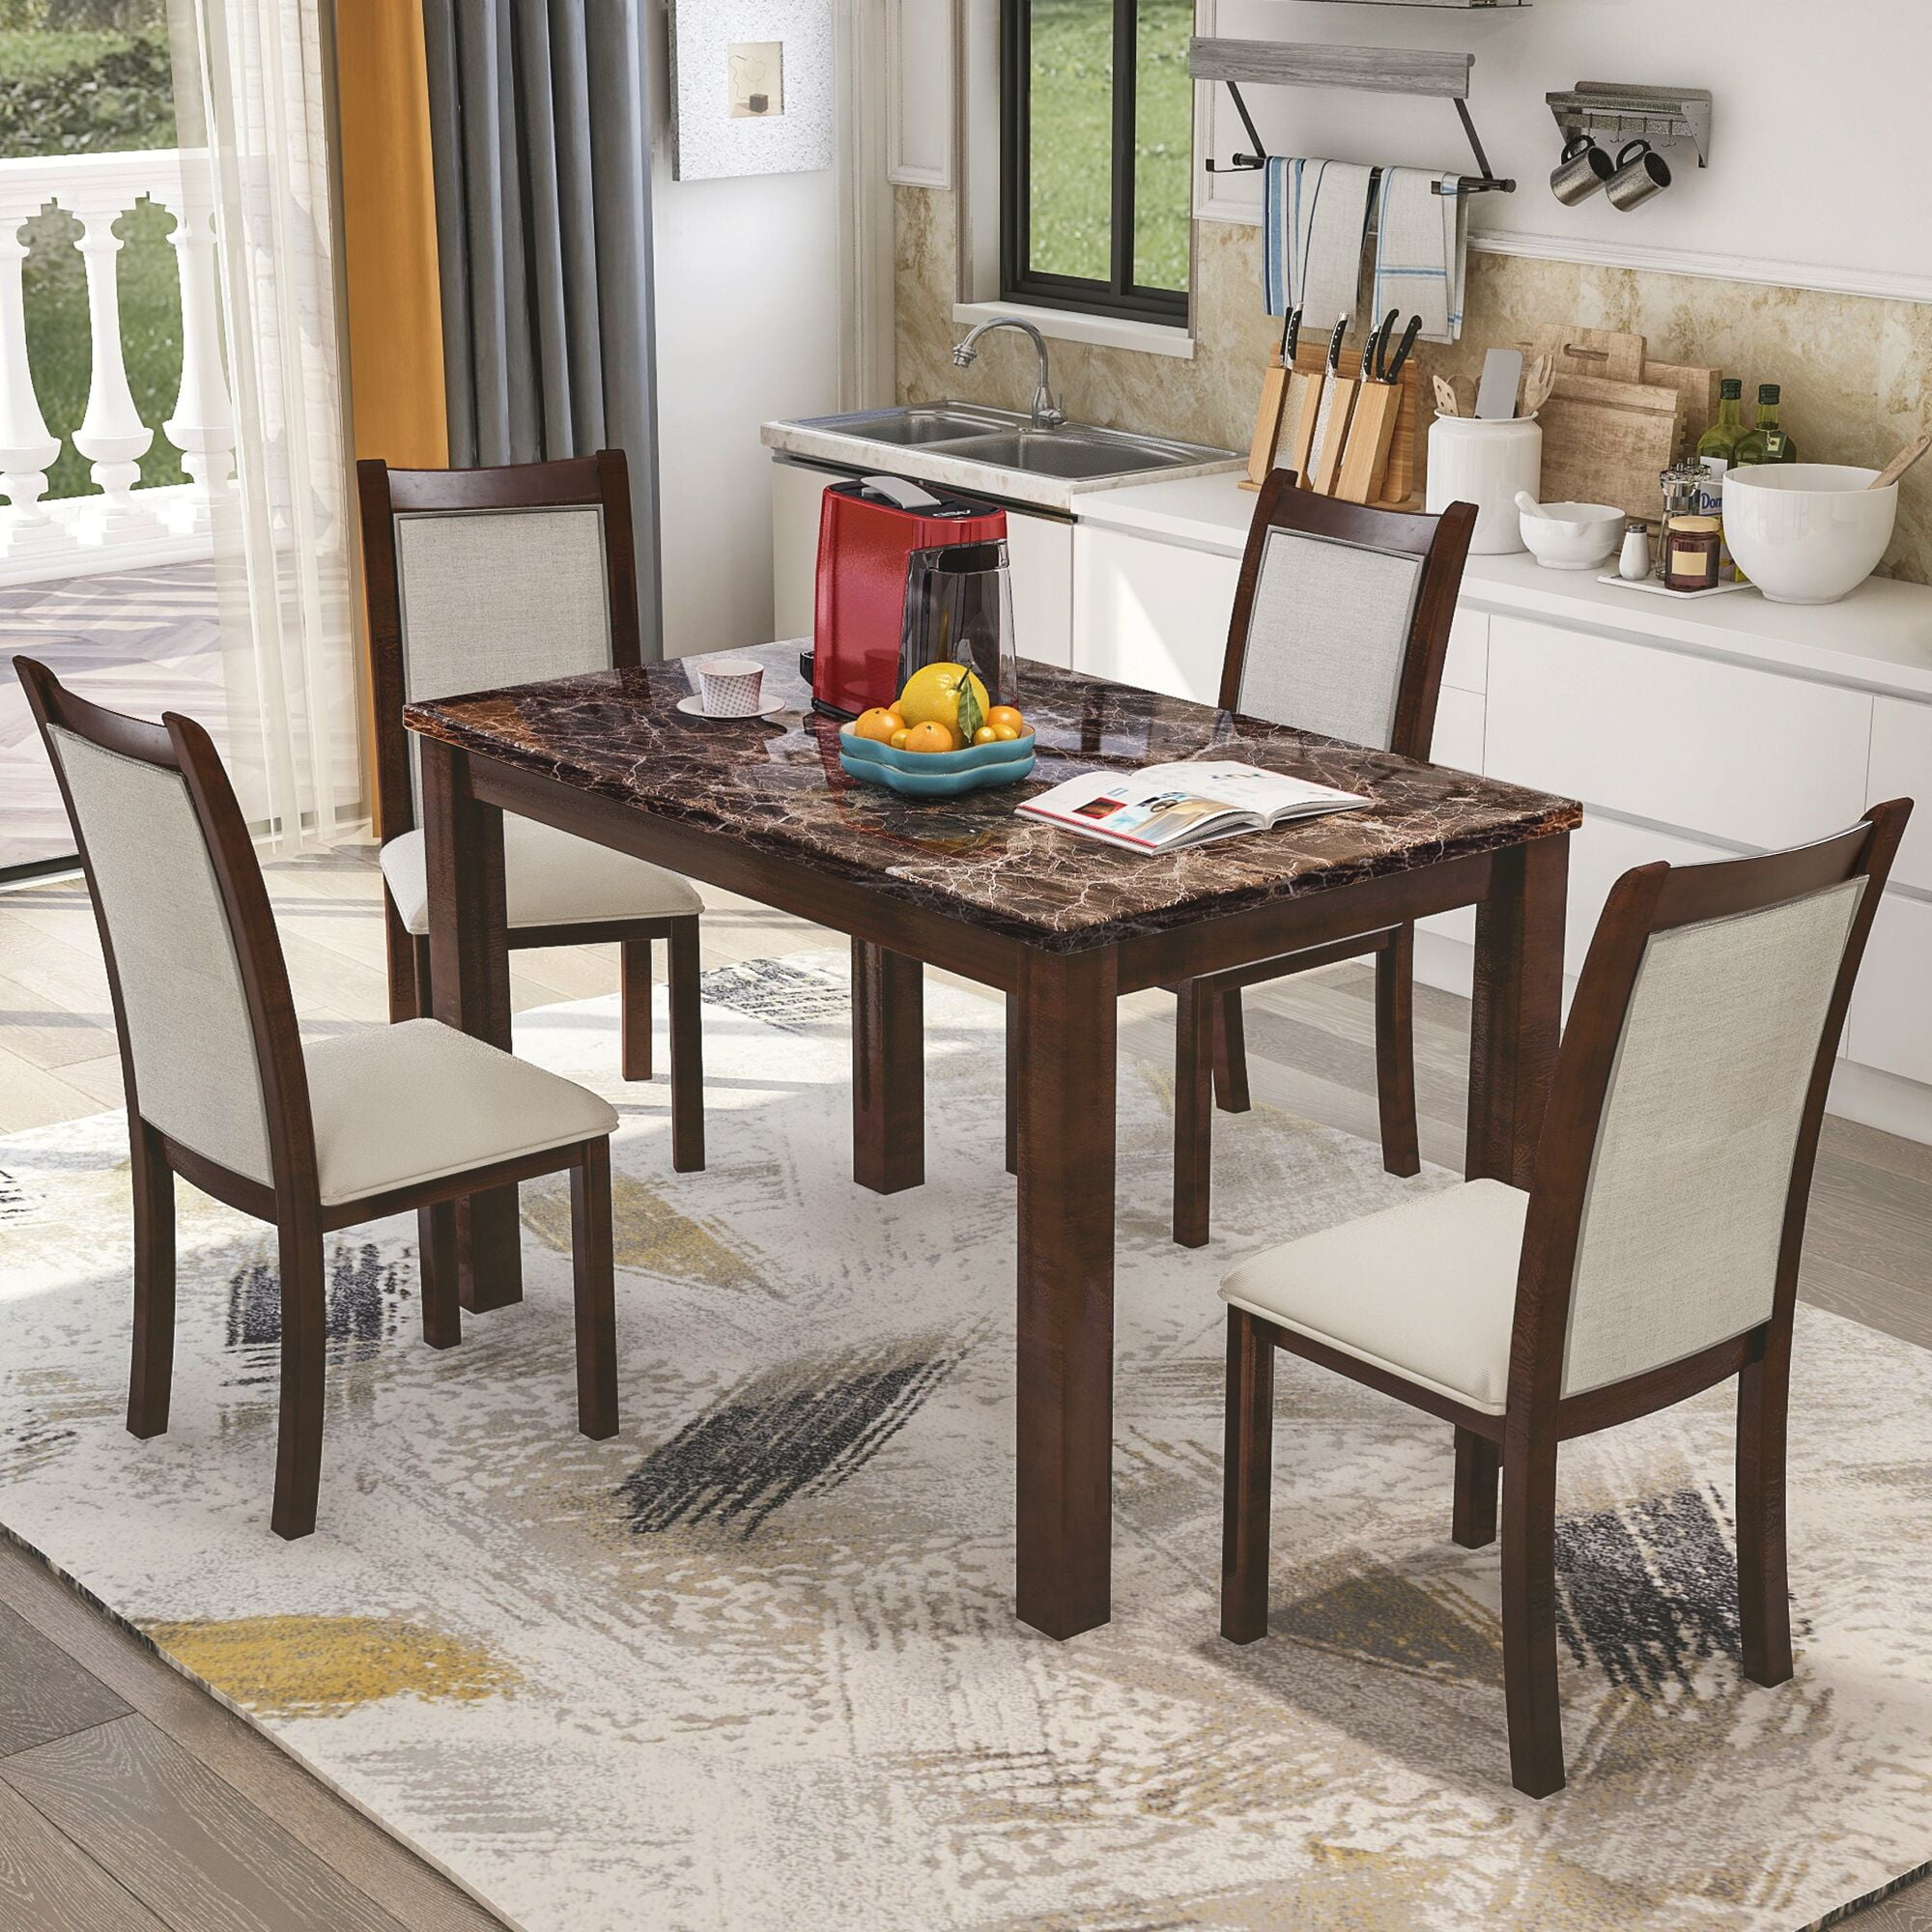 Harper & Bright Designs Dining Kitchen Table Set with Chairs, 5-Piece